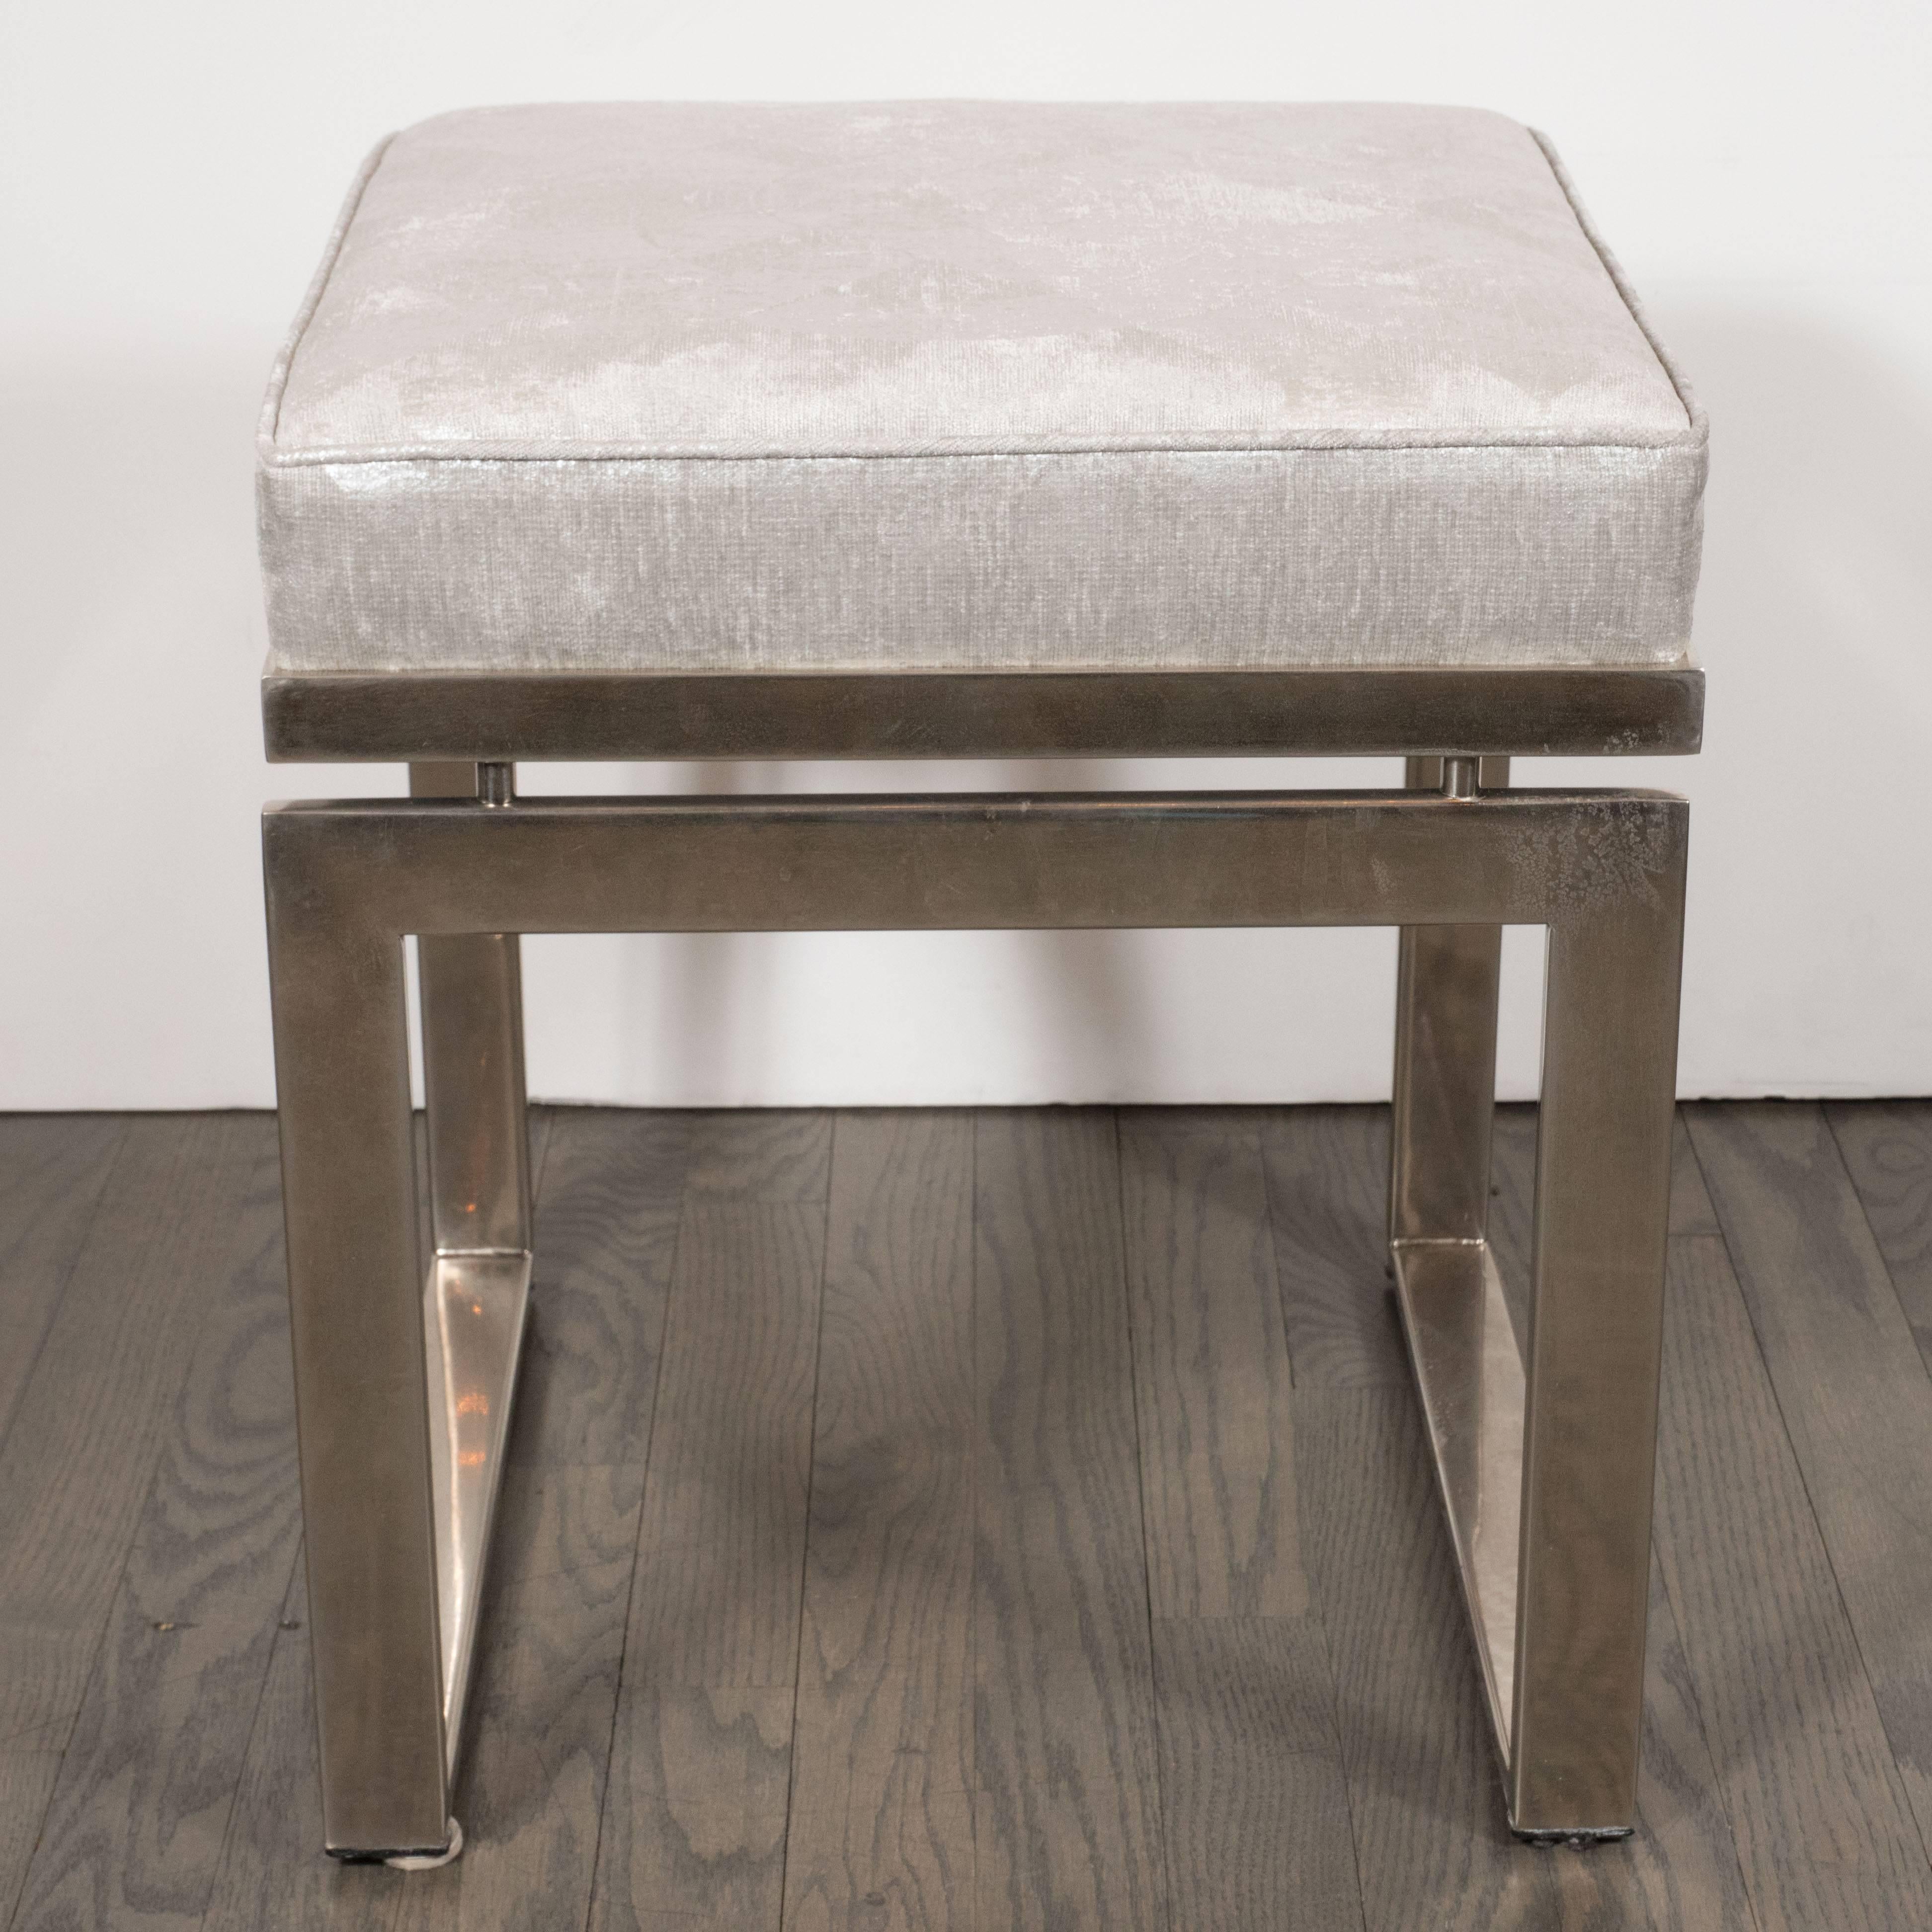 American Pair of Mid-Century Modernist Chrome Stools with Textured Metallic Upholstery